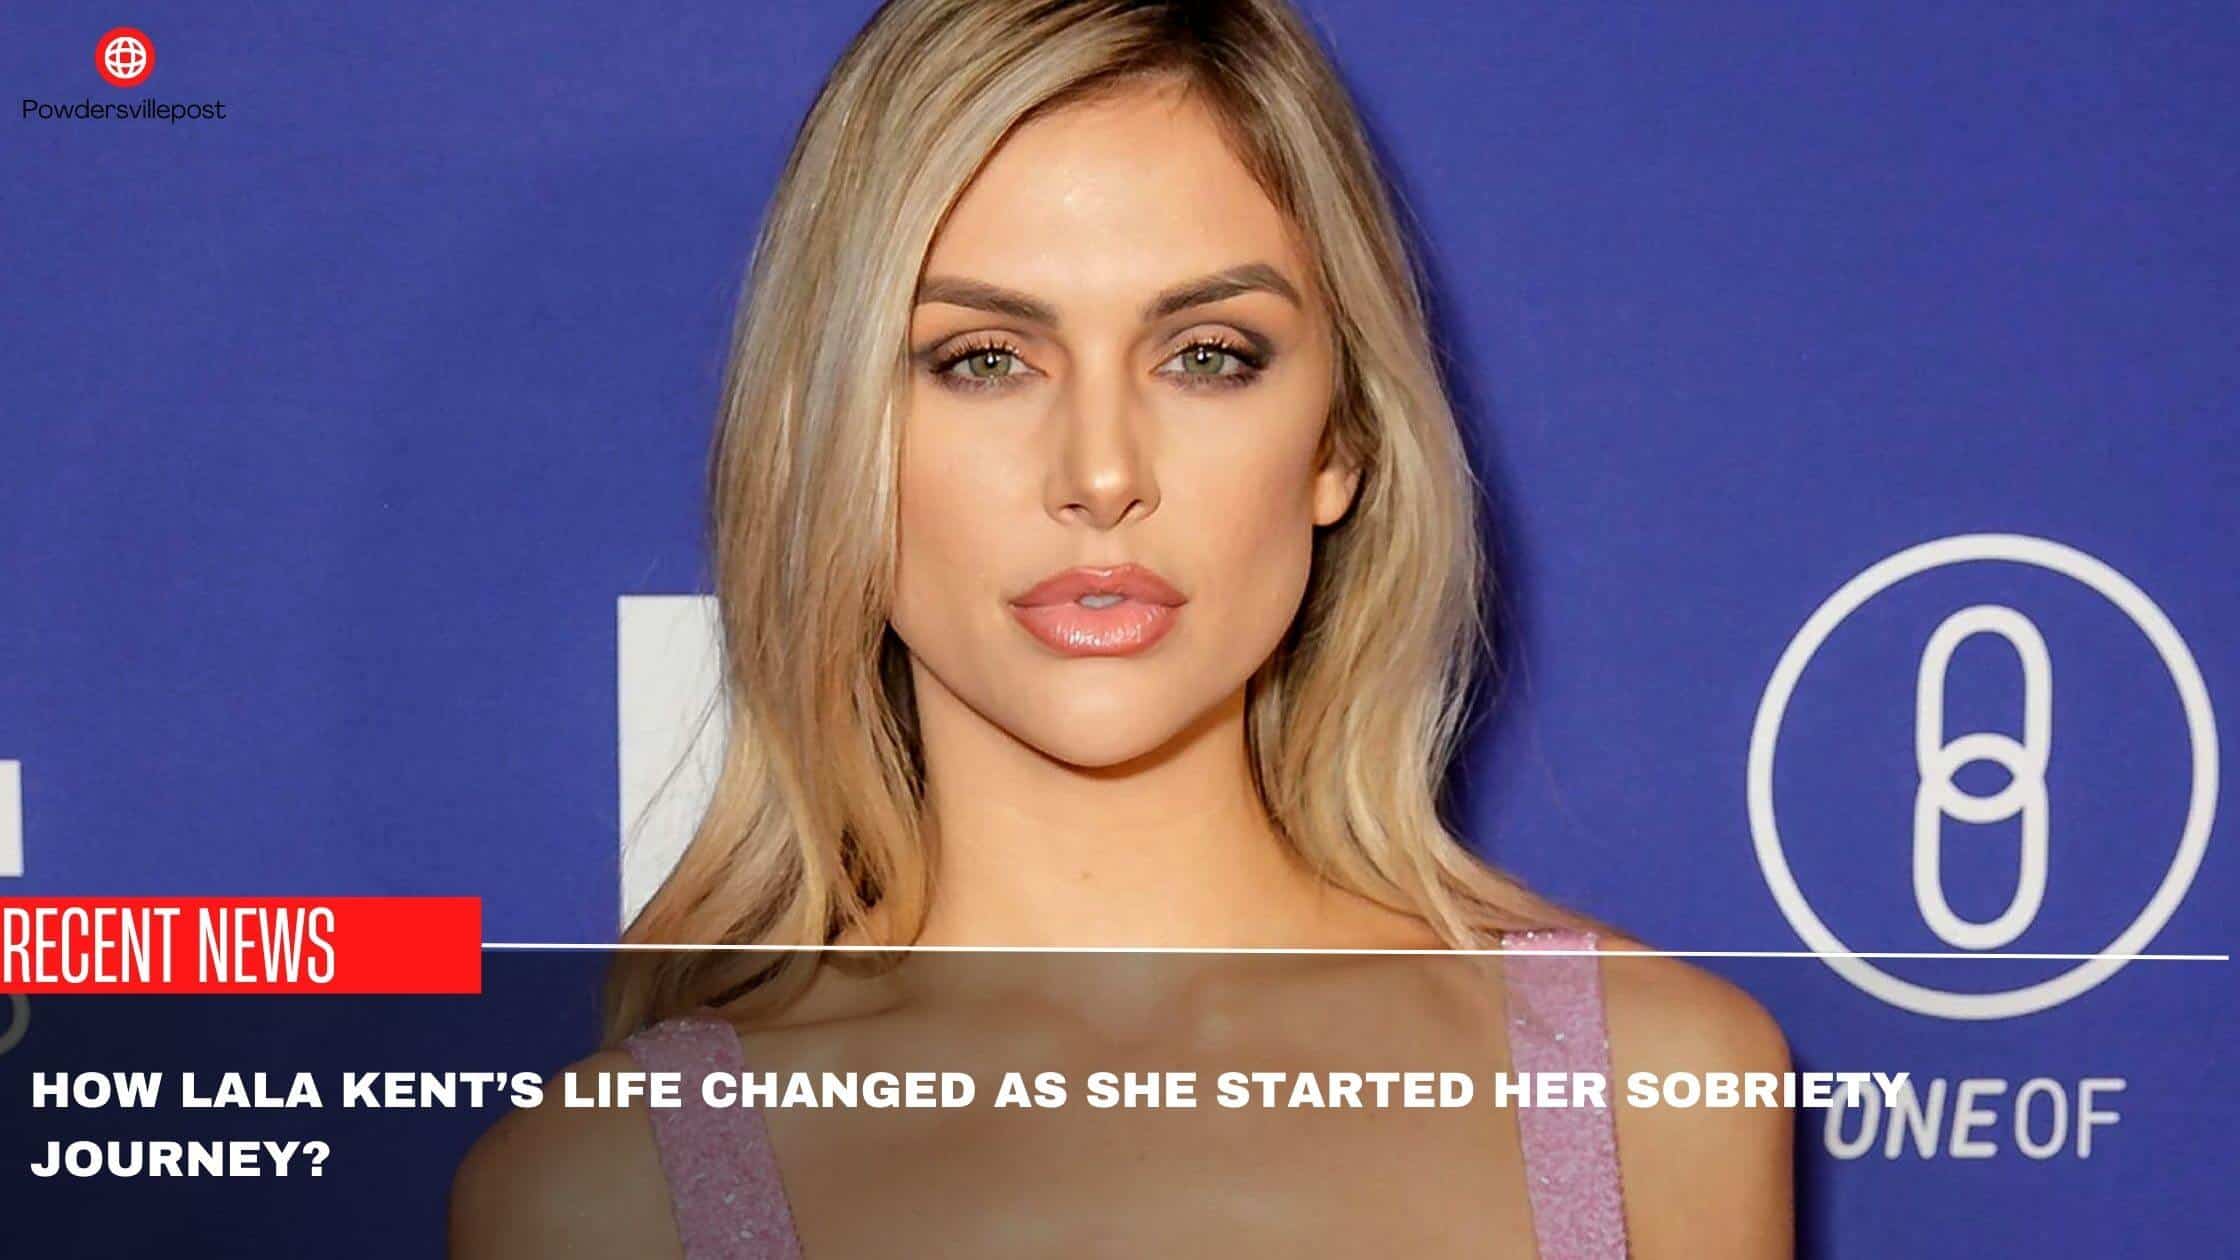 How Lala Kent’s Life Changed As She Started Her Sobriety Journey